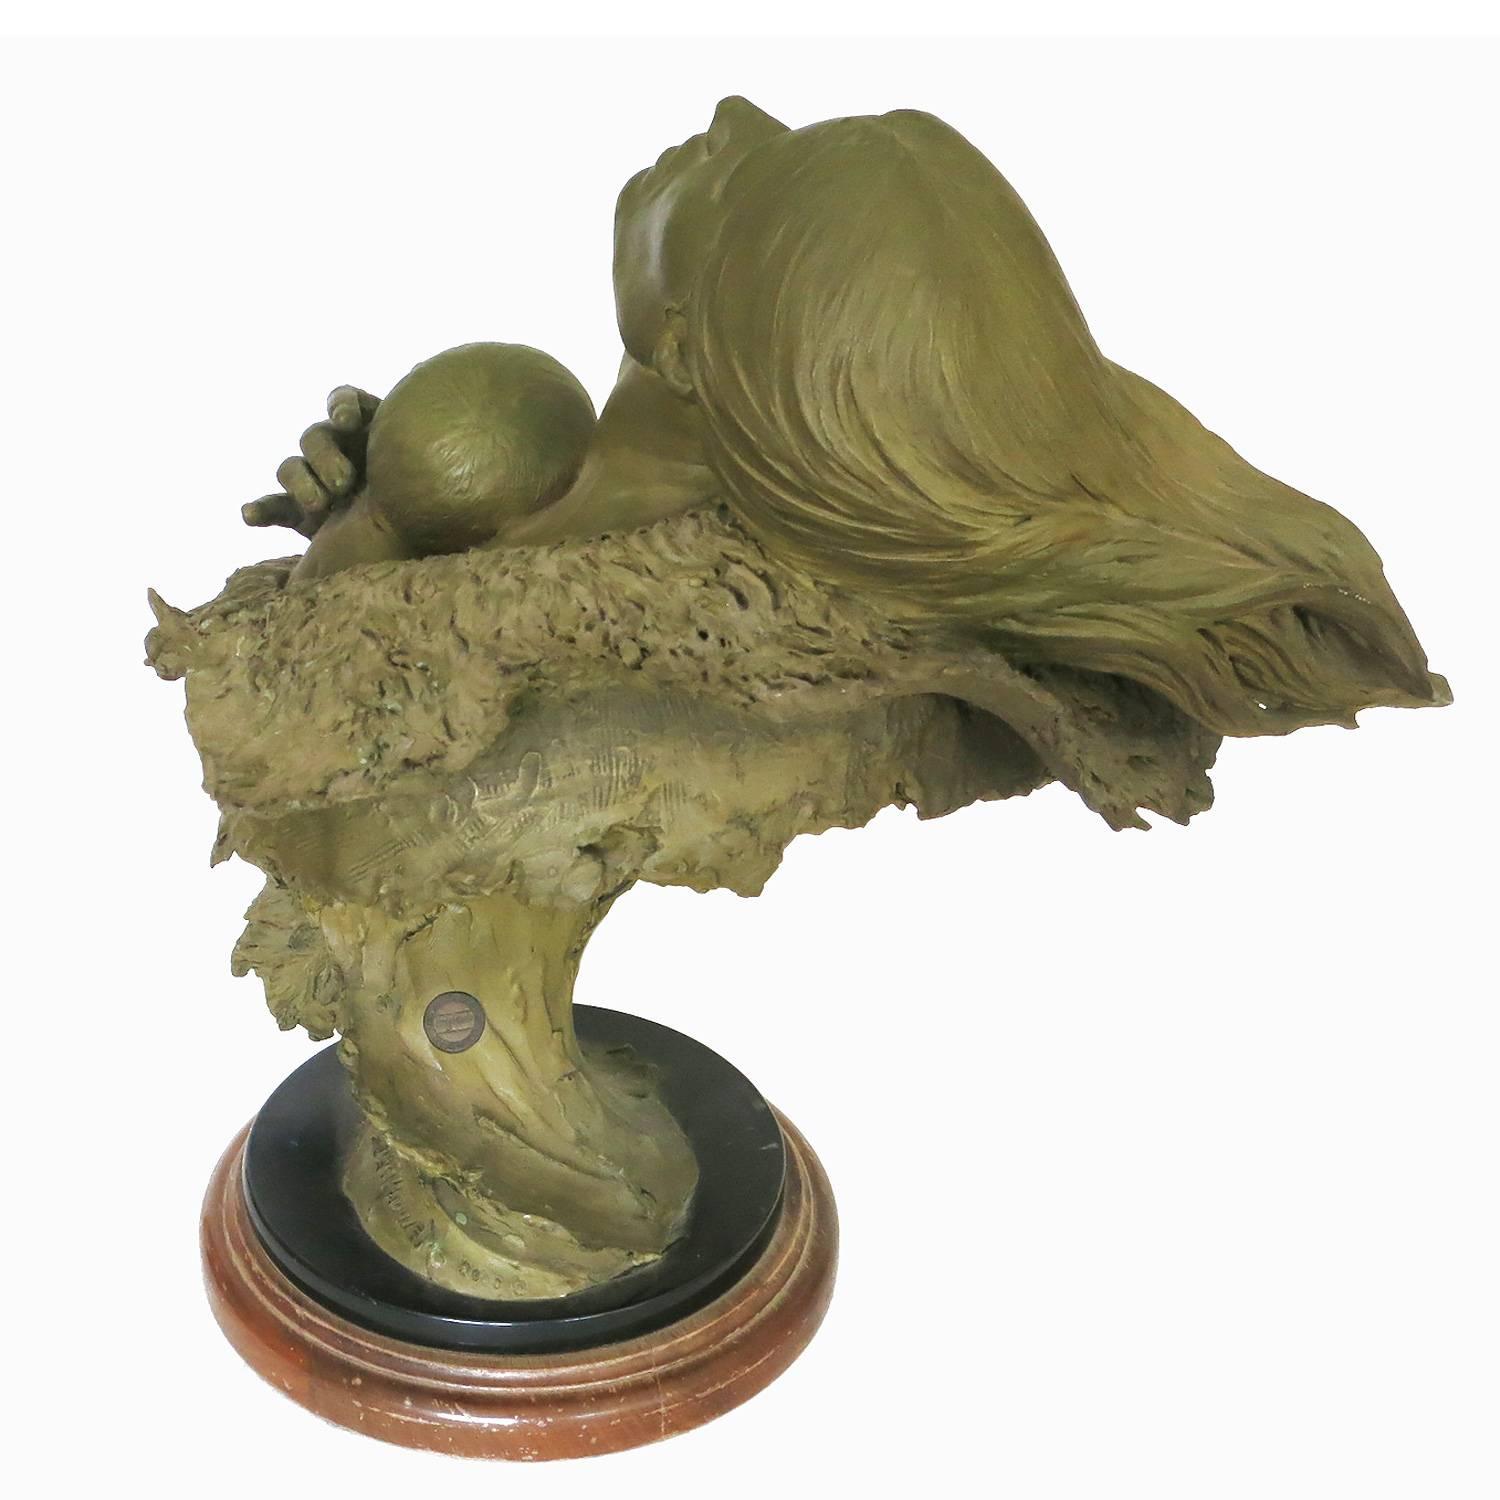 Rare Mother and Child Sculpture Bust by Joe Slockbower for Mill Creek Studios In Excellent Condition For Sale In Van Nuys, CA